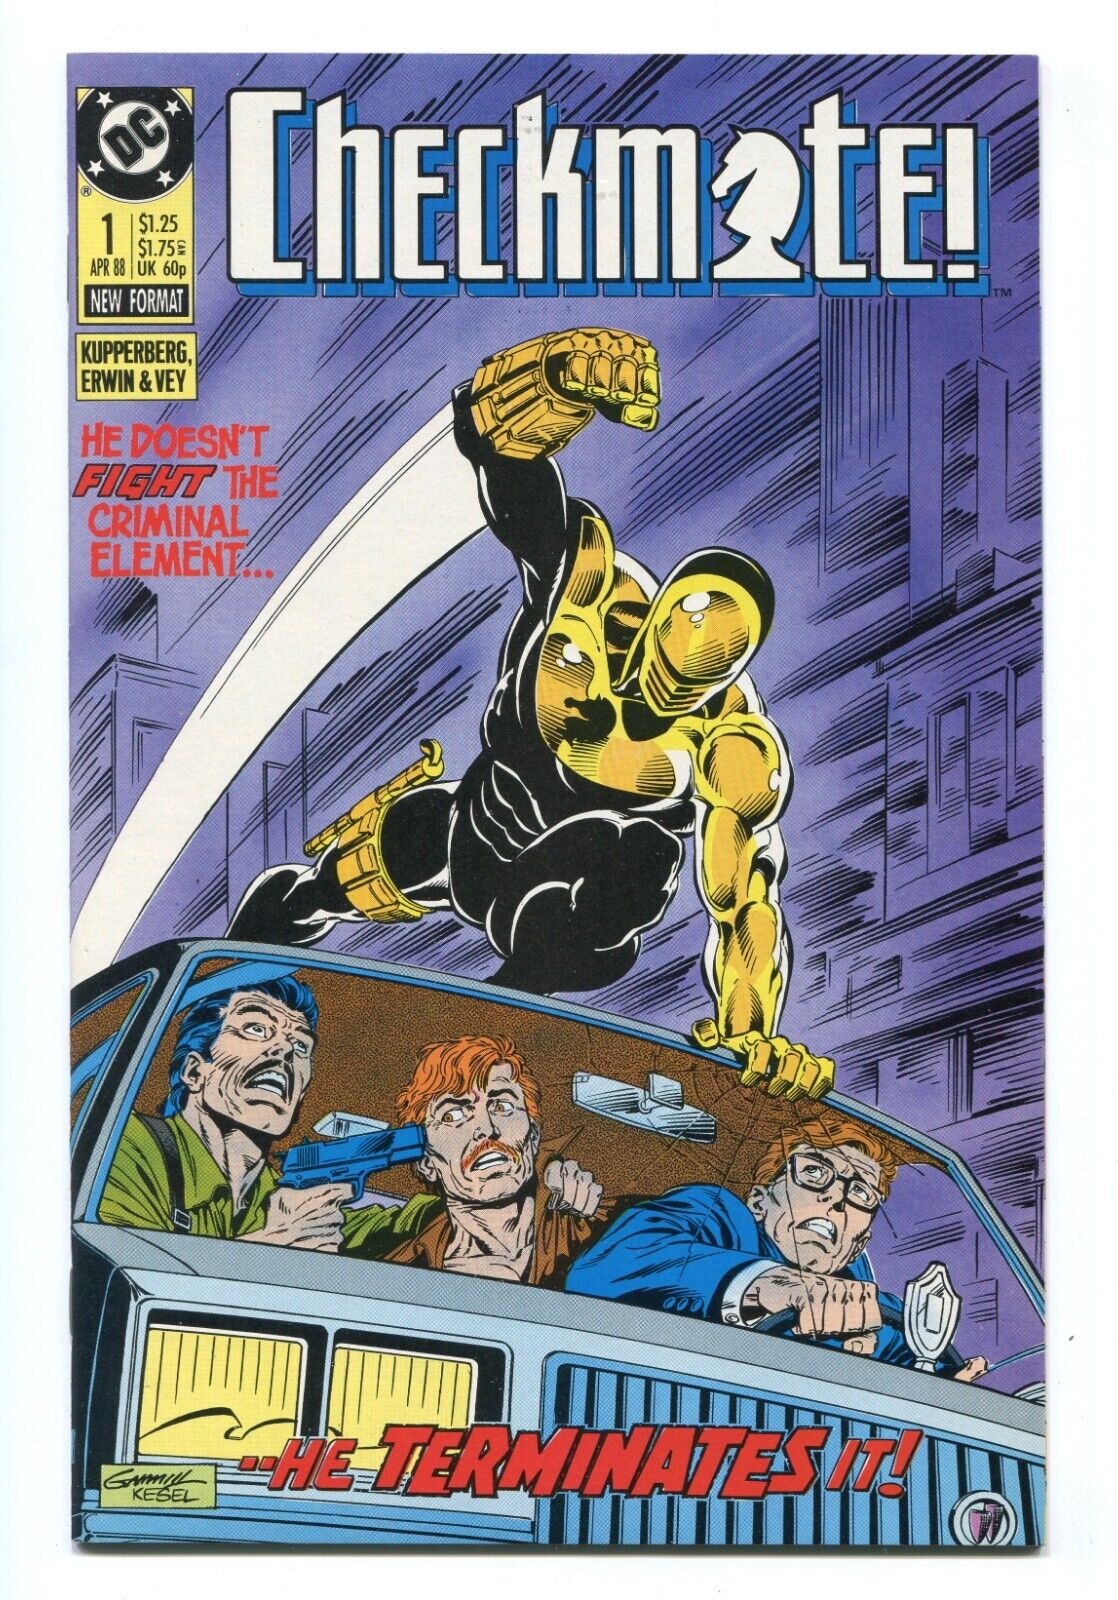 CHECKMATE #1 - THE TEAM STARTS ON THEIR 1ST CASE - UNREAD 9.6 COPY - 1988